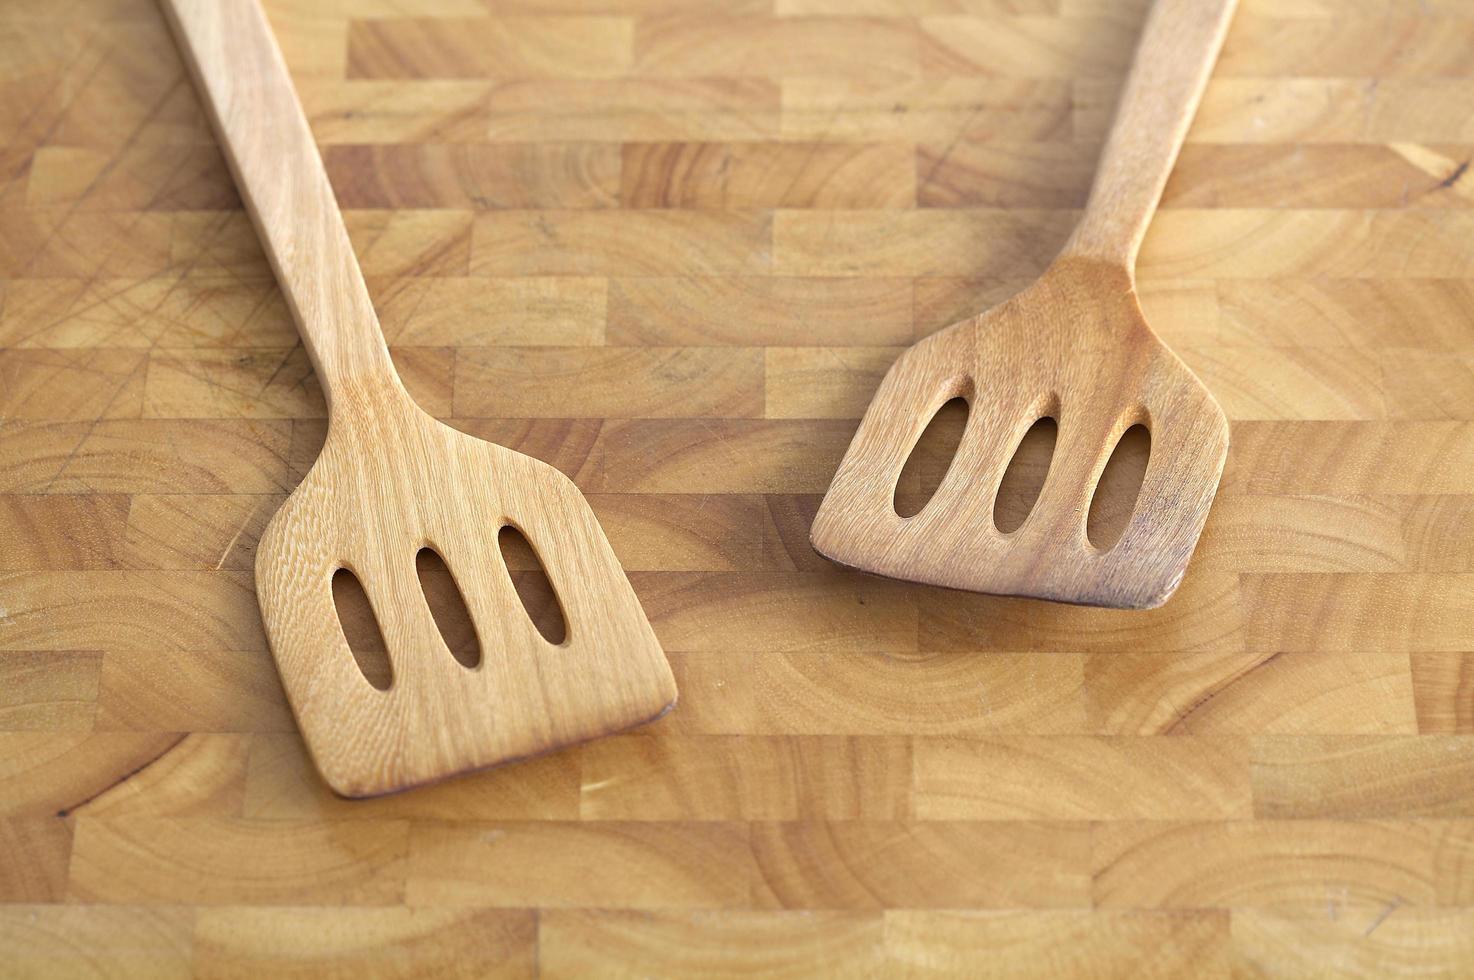 Wooden utensils on wooden table in natural light photo